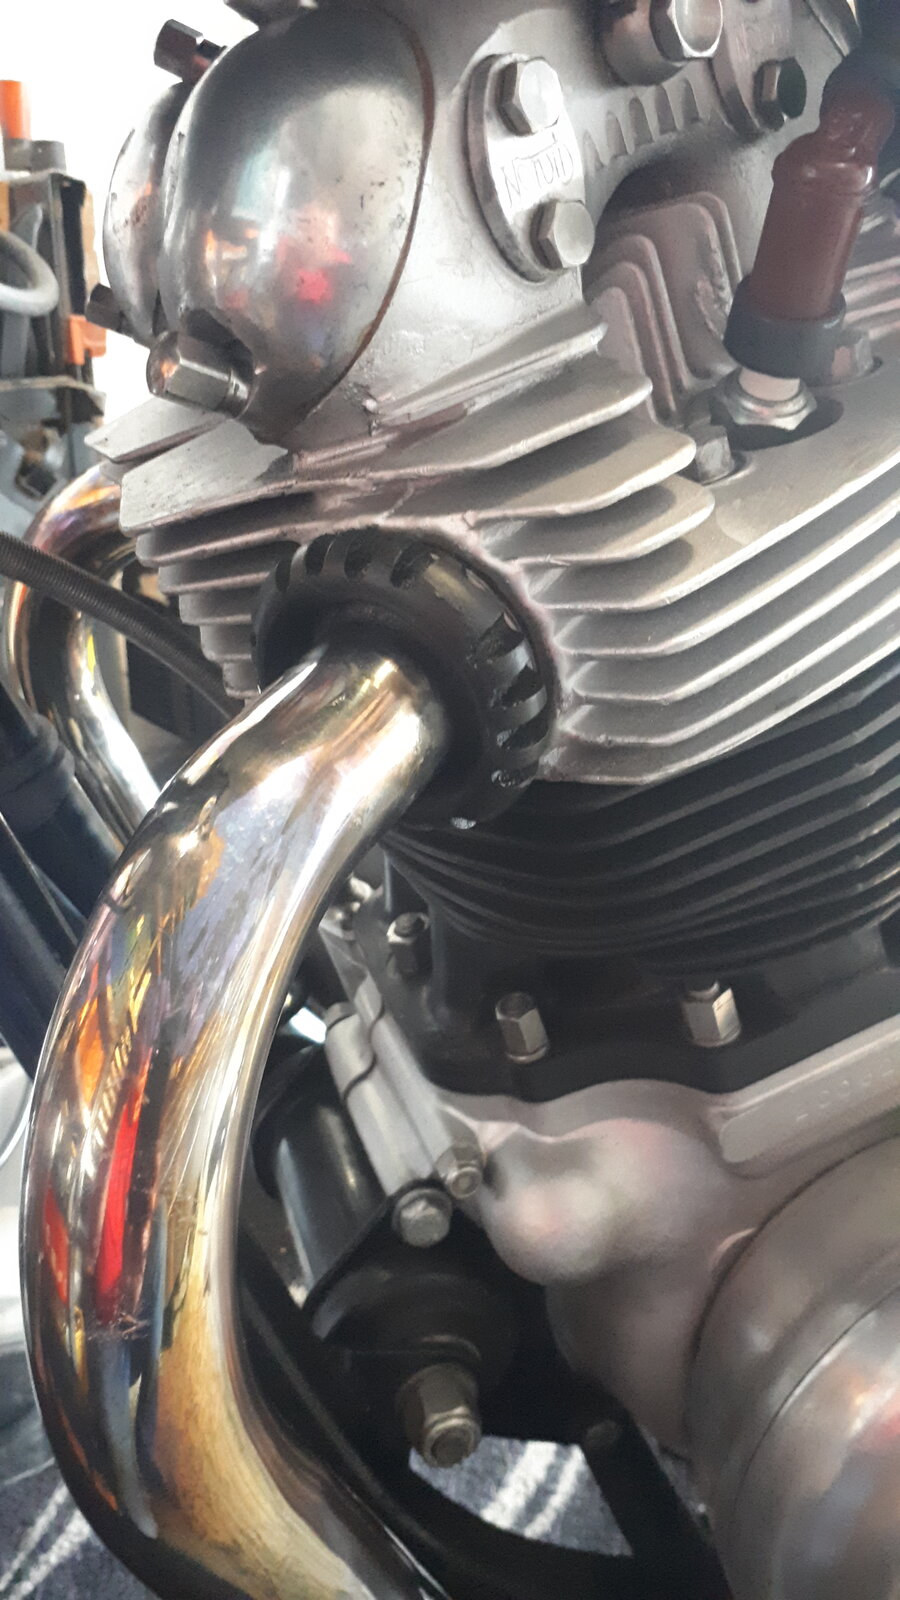 Exhaust nut question